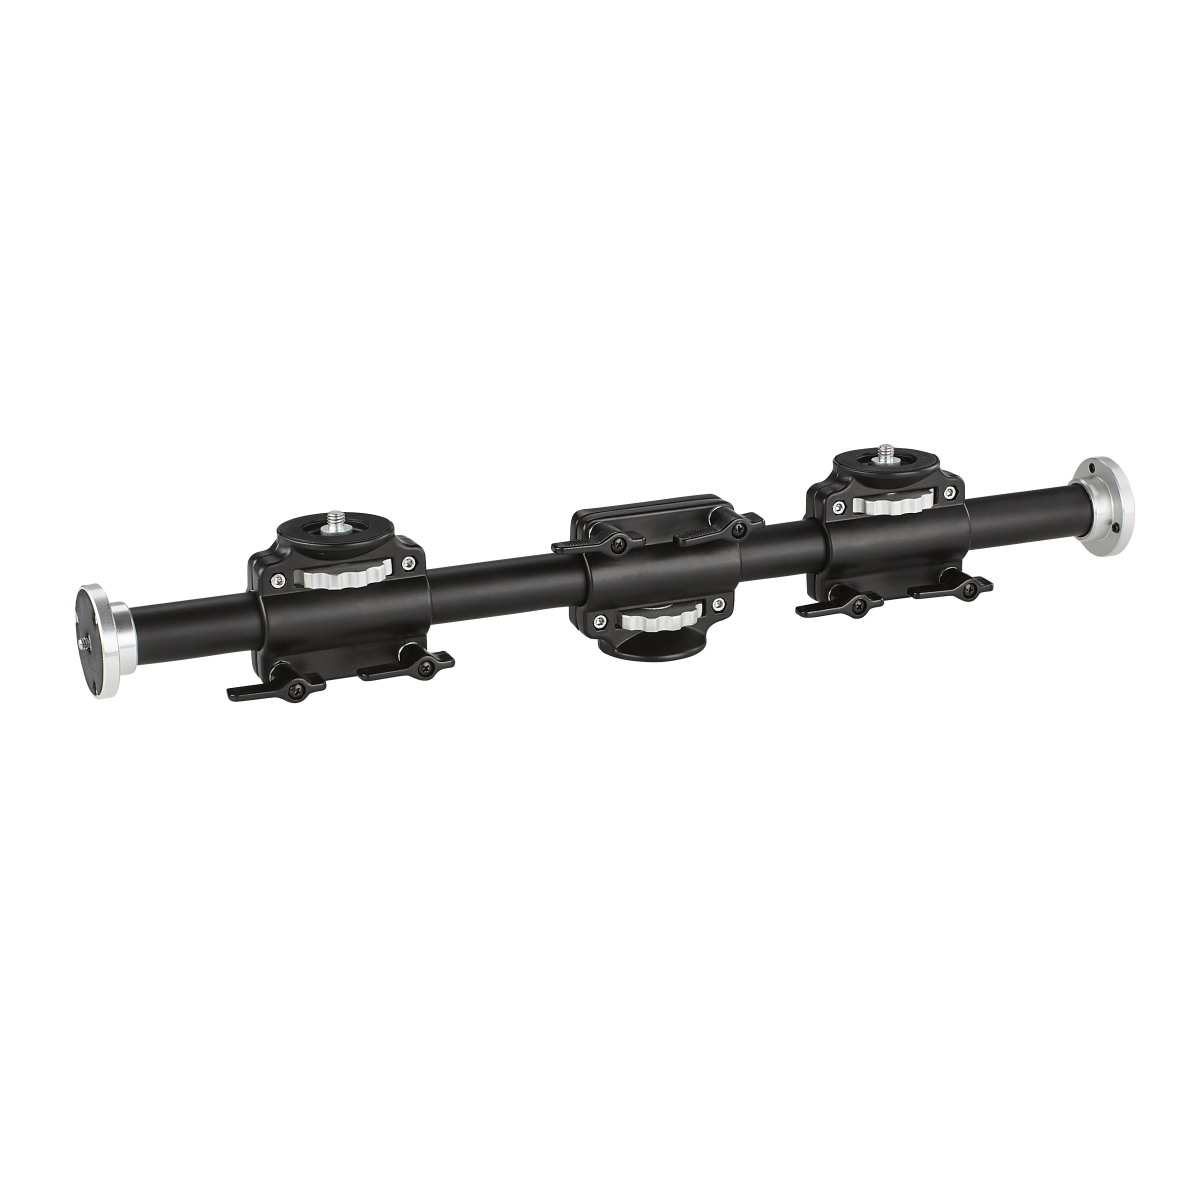 Walimex WT-628 Extension Arm with 2 sledges